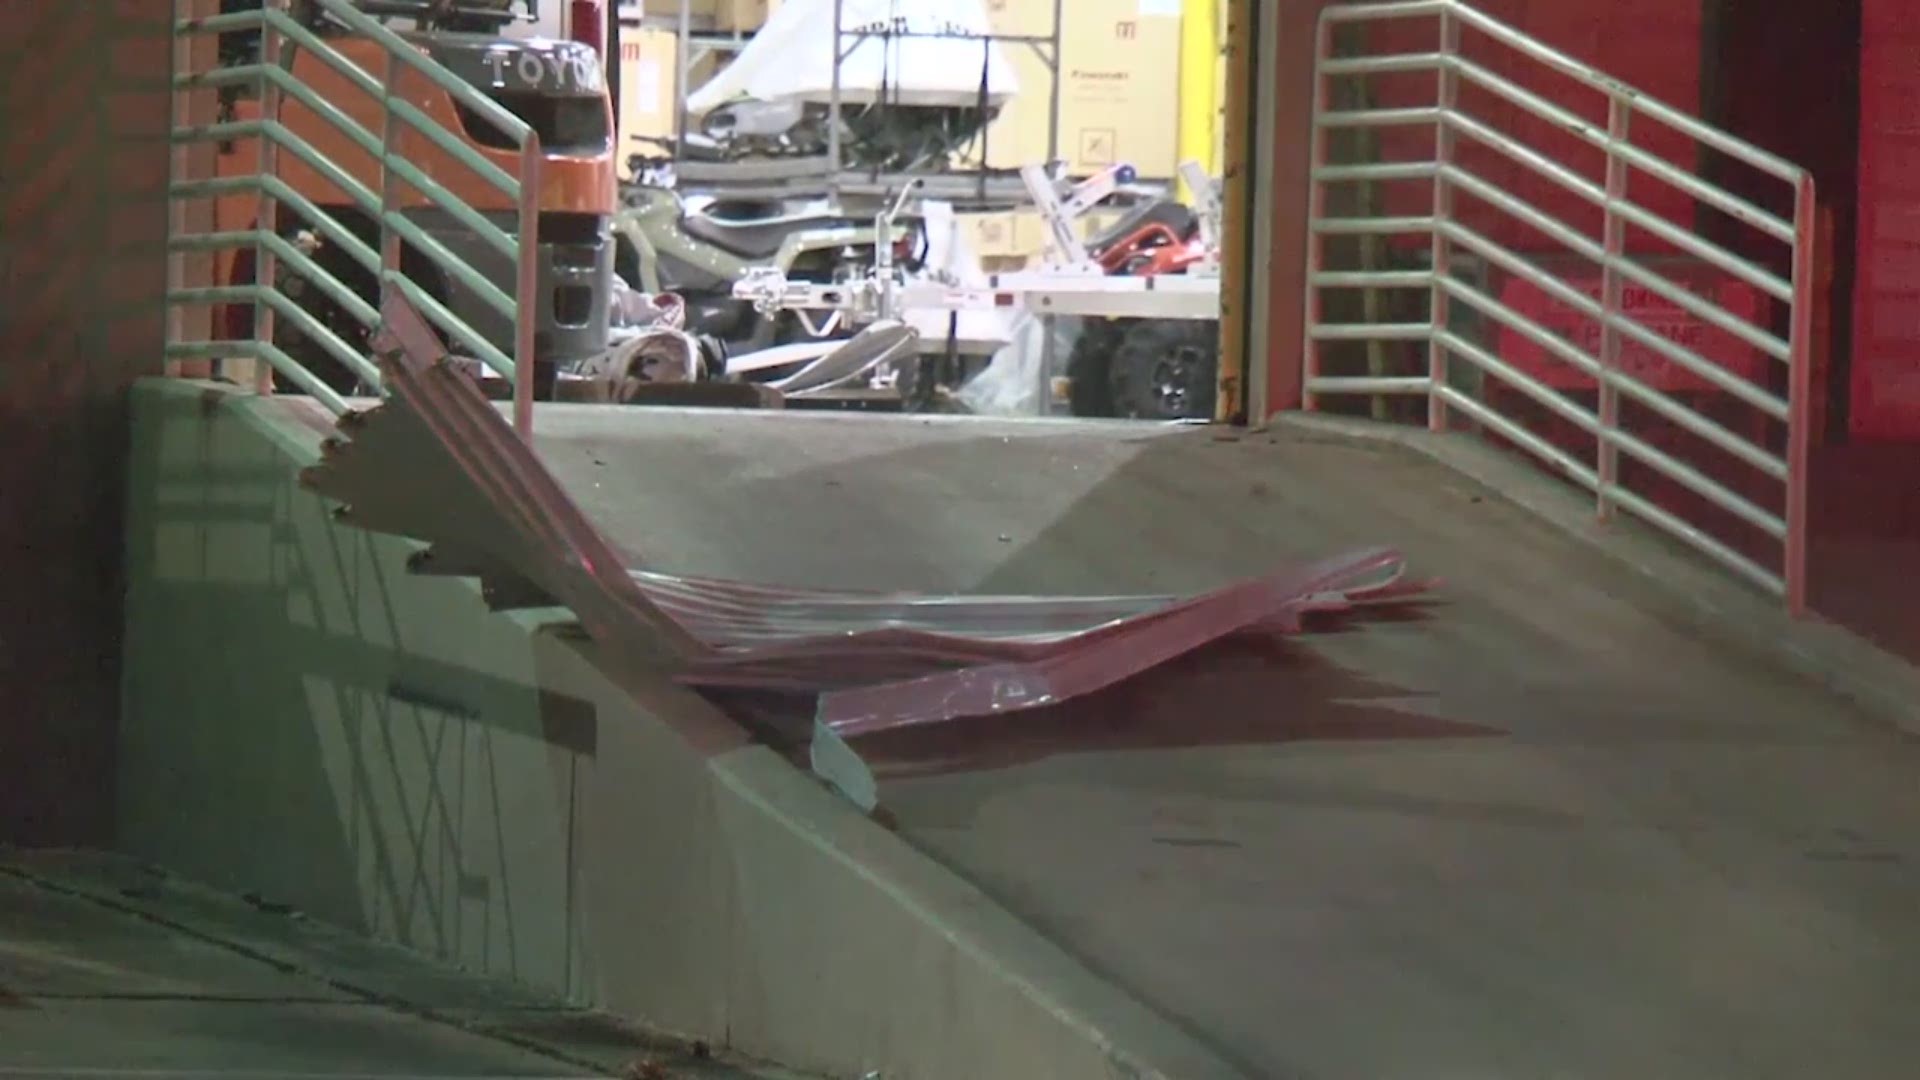 Two suspects were arrested after police say they a smashed into a southwest Houston warehouse to steal a pair of three-wheeled motorcycles early Monday.